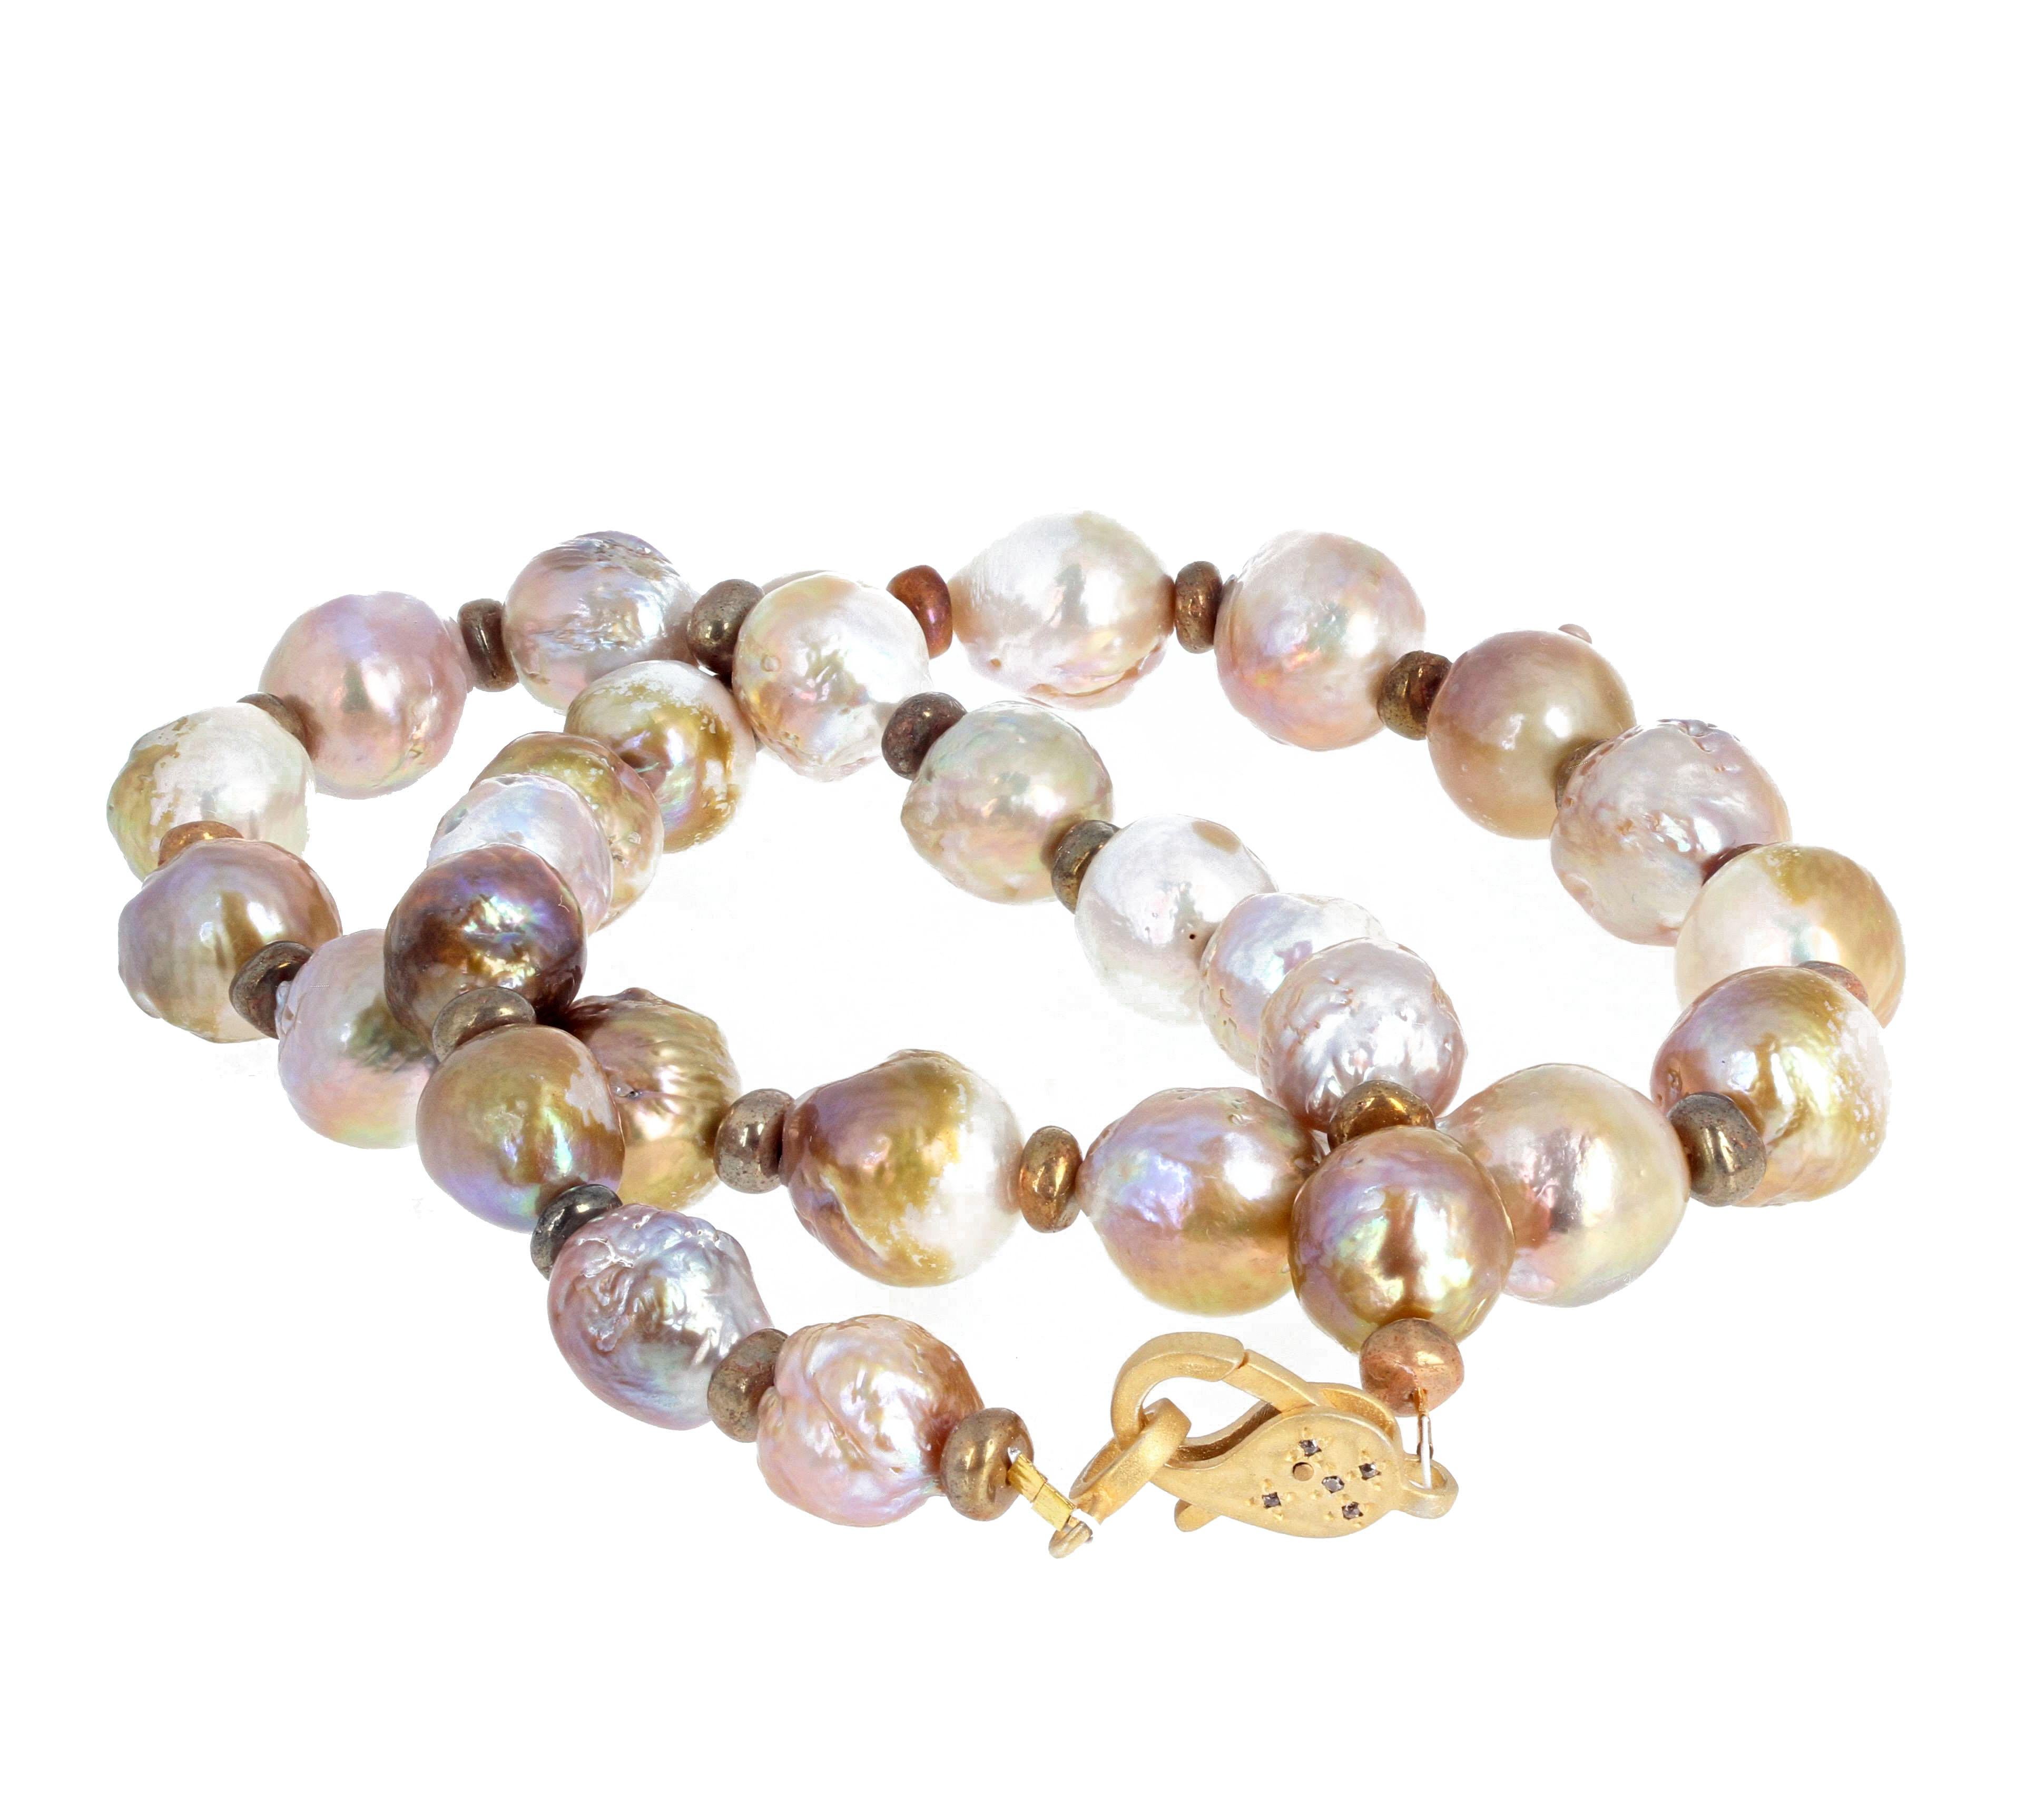 This is fascinating and extremely beautiful as these ocean cultured Pearls glow magnificently around your neck.  They go from the largest at 15.7mm to the smaller ones on the end at approximately 13.5mm round.  They are enhanced with teeny round